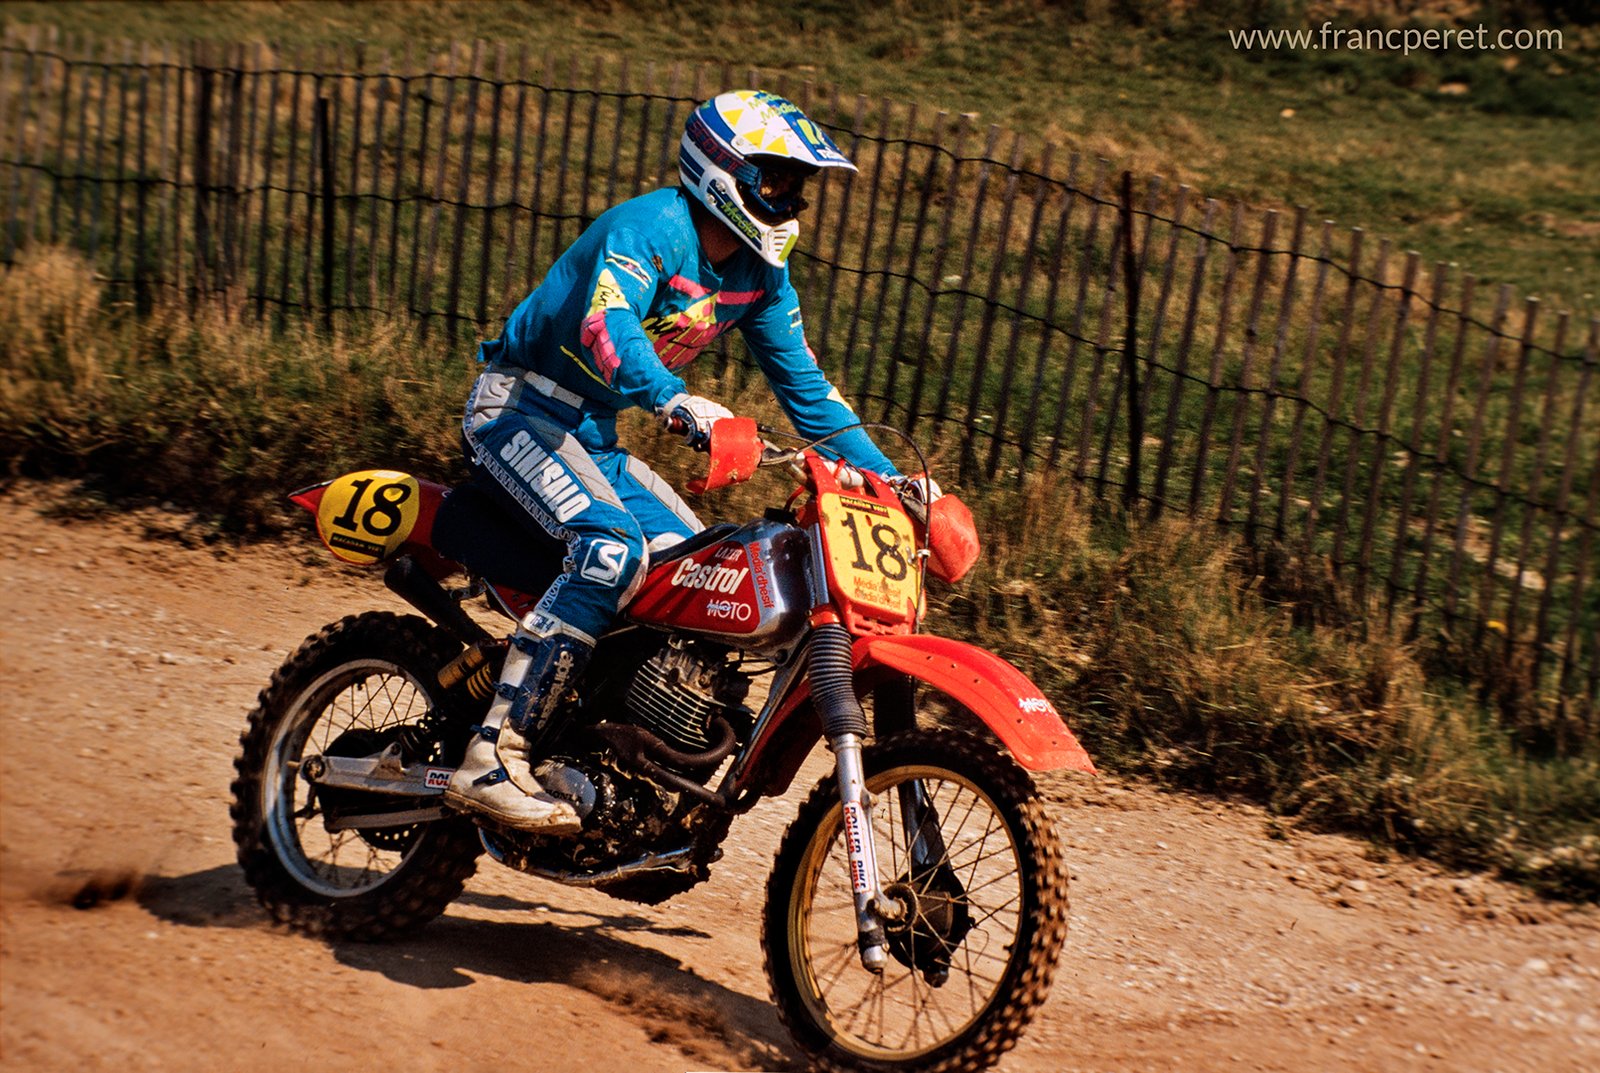 To keep fit and to experiment new sensation, I owned a bike to race on Motocross tracks